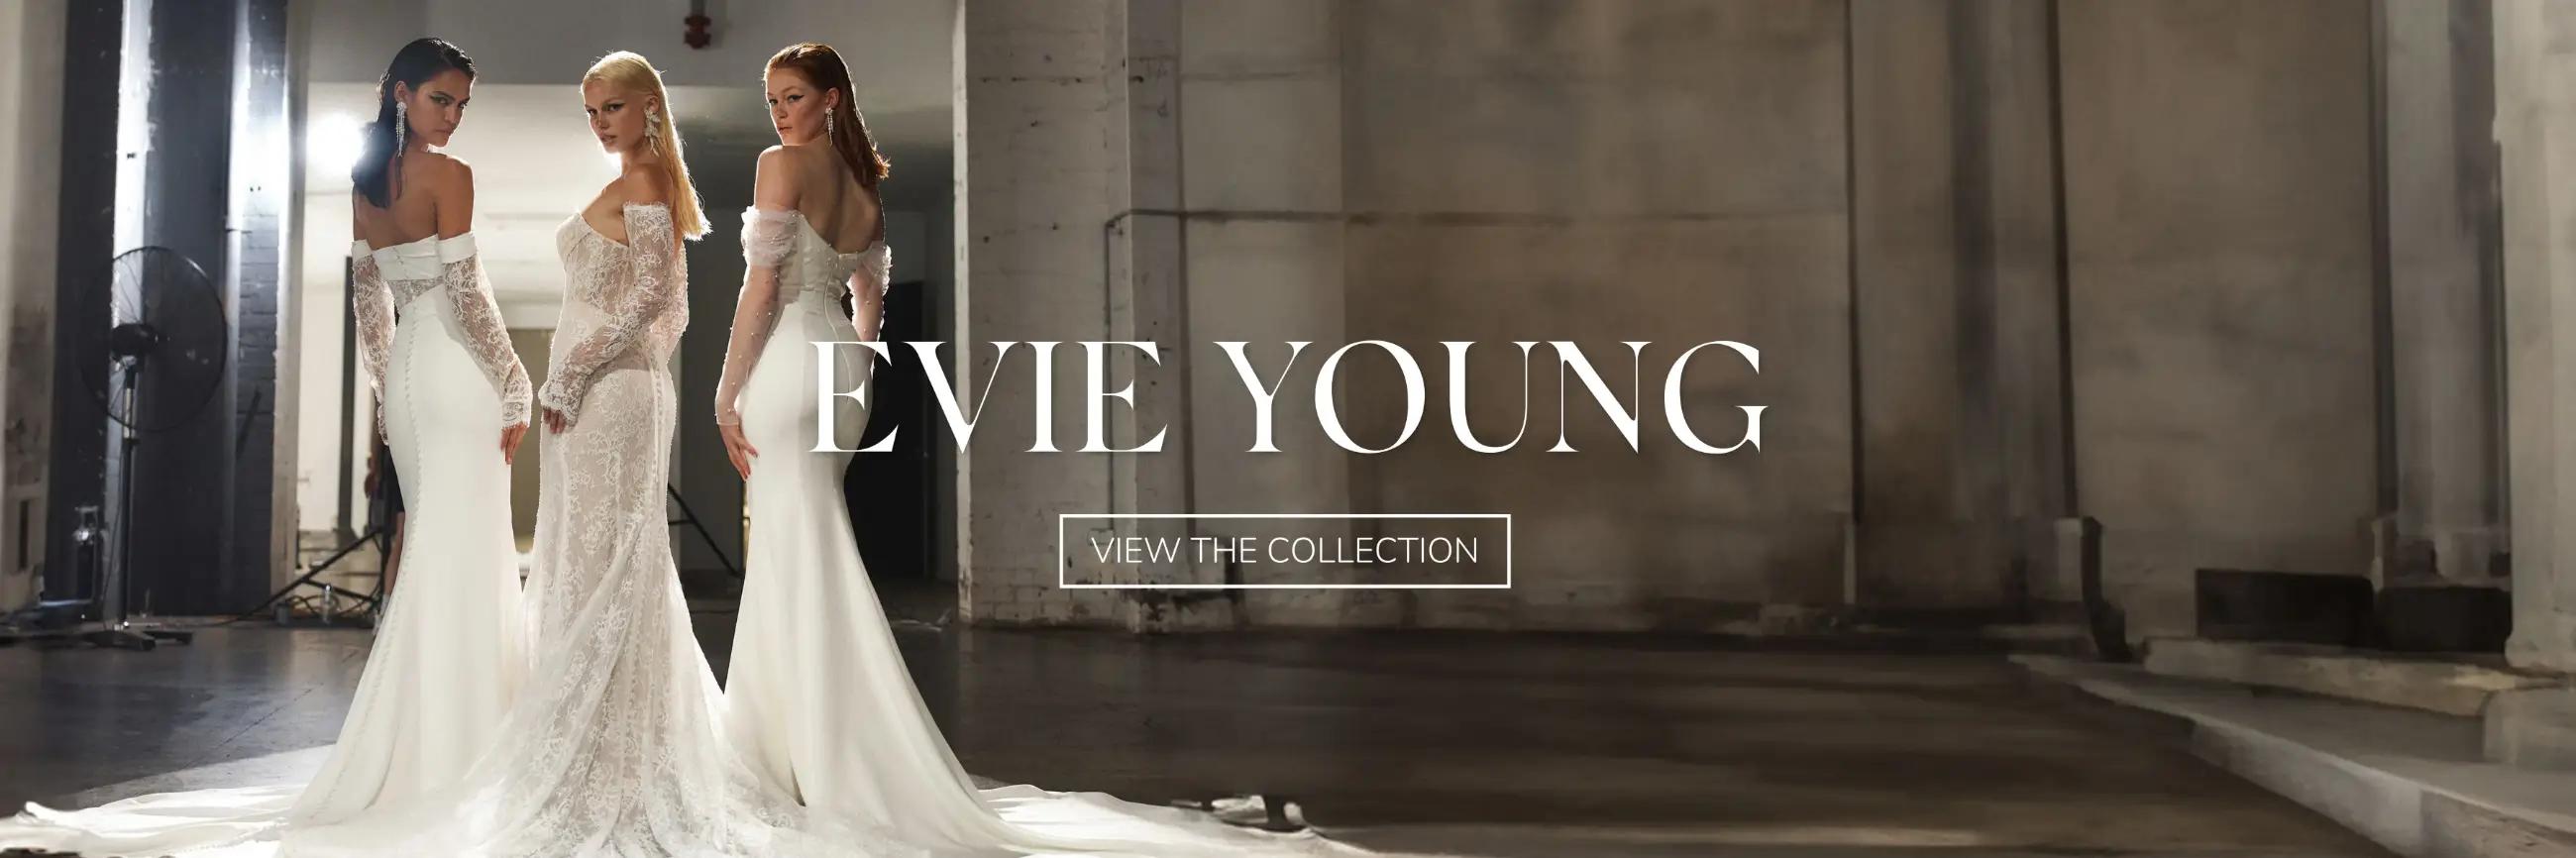 Evie Young Wedding Dresses